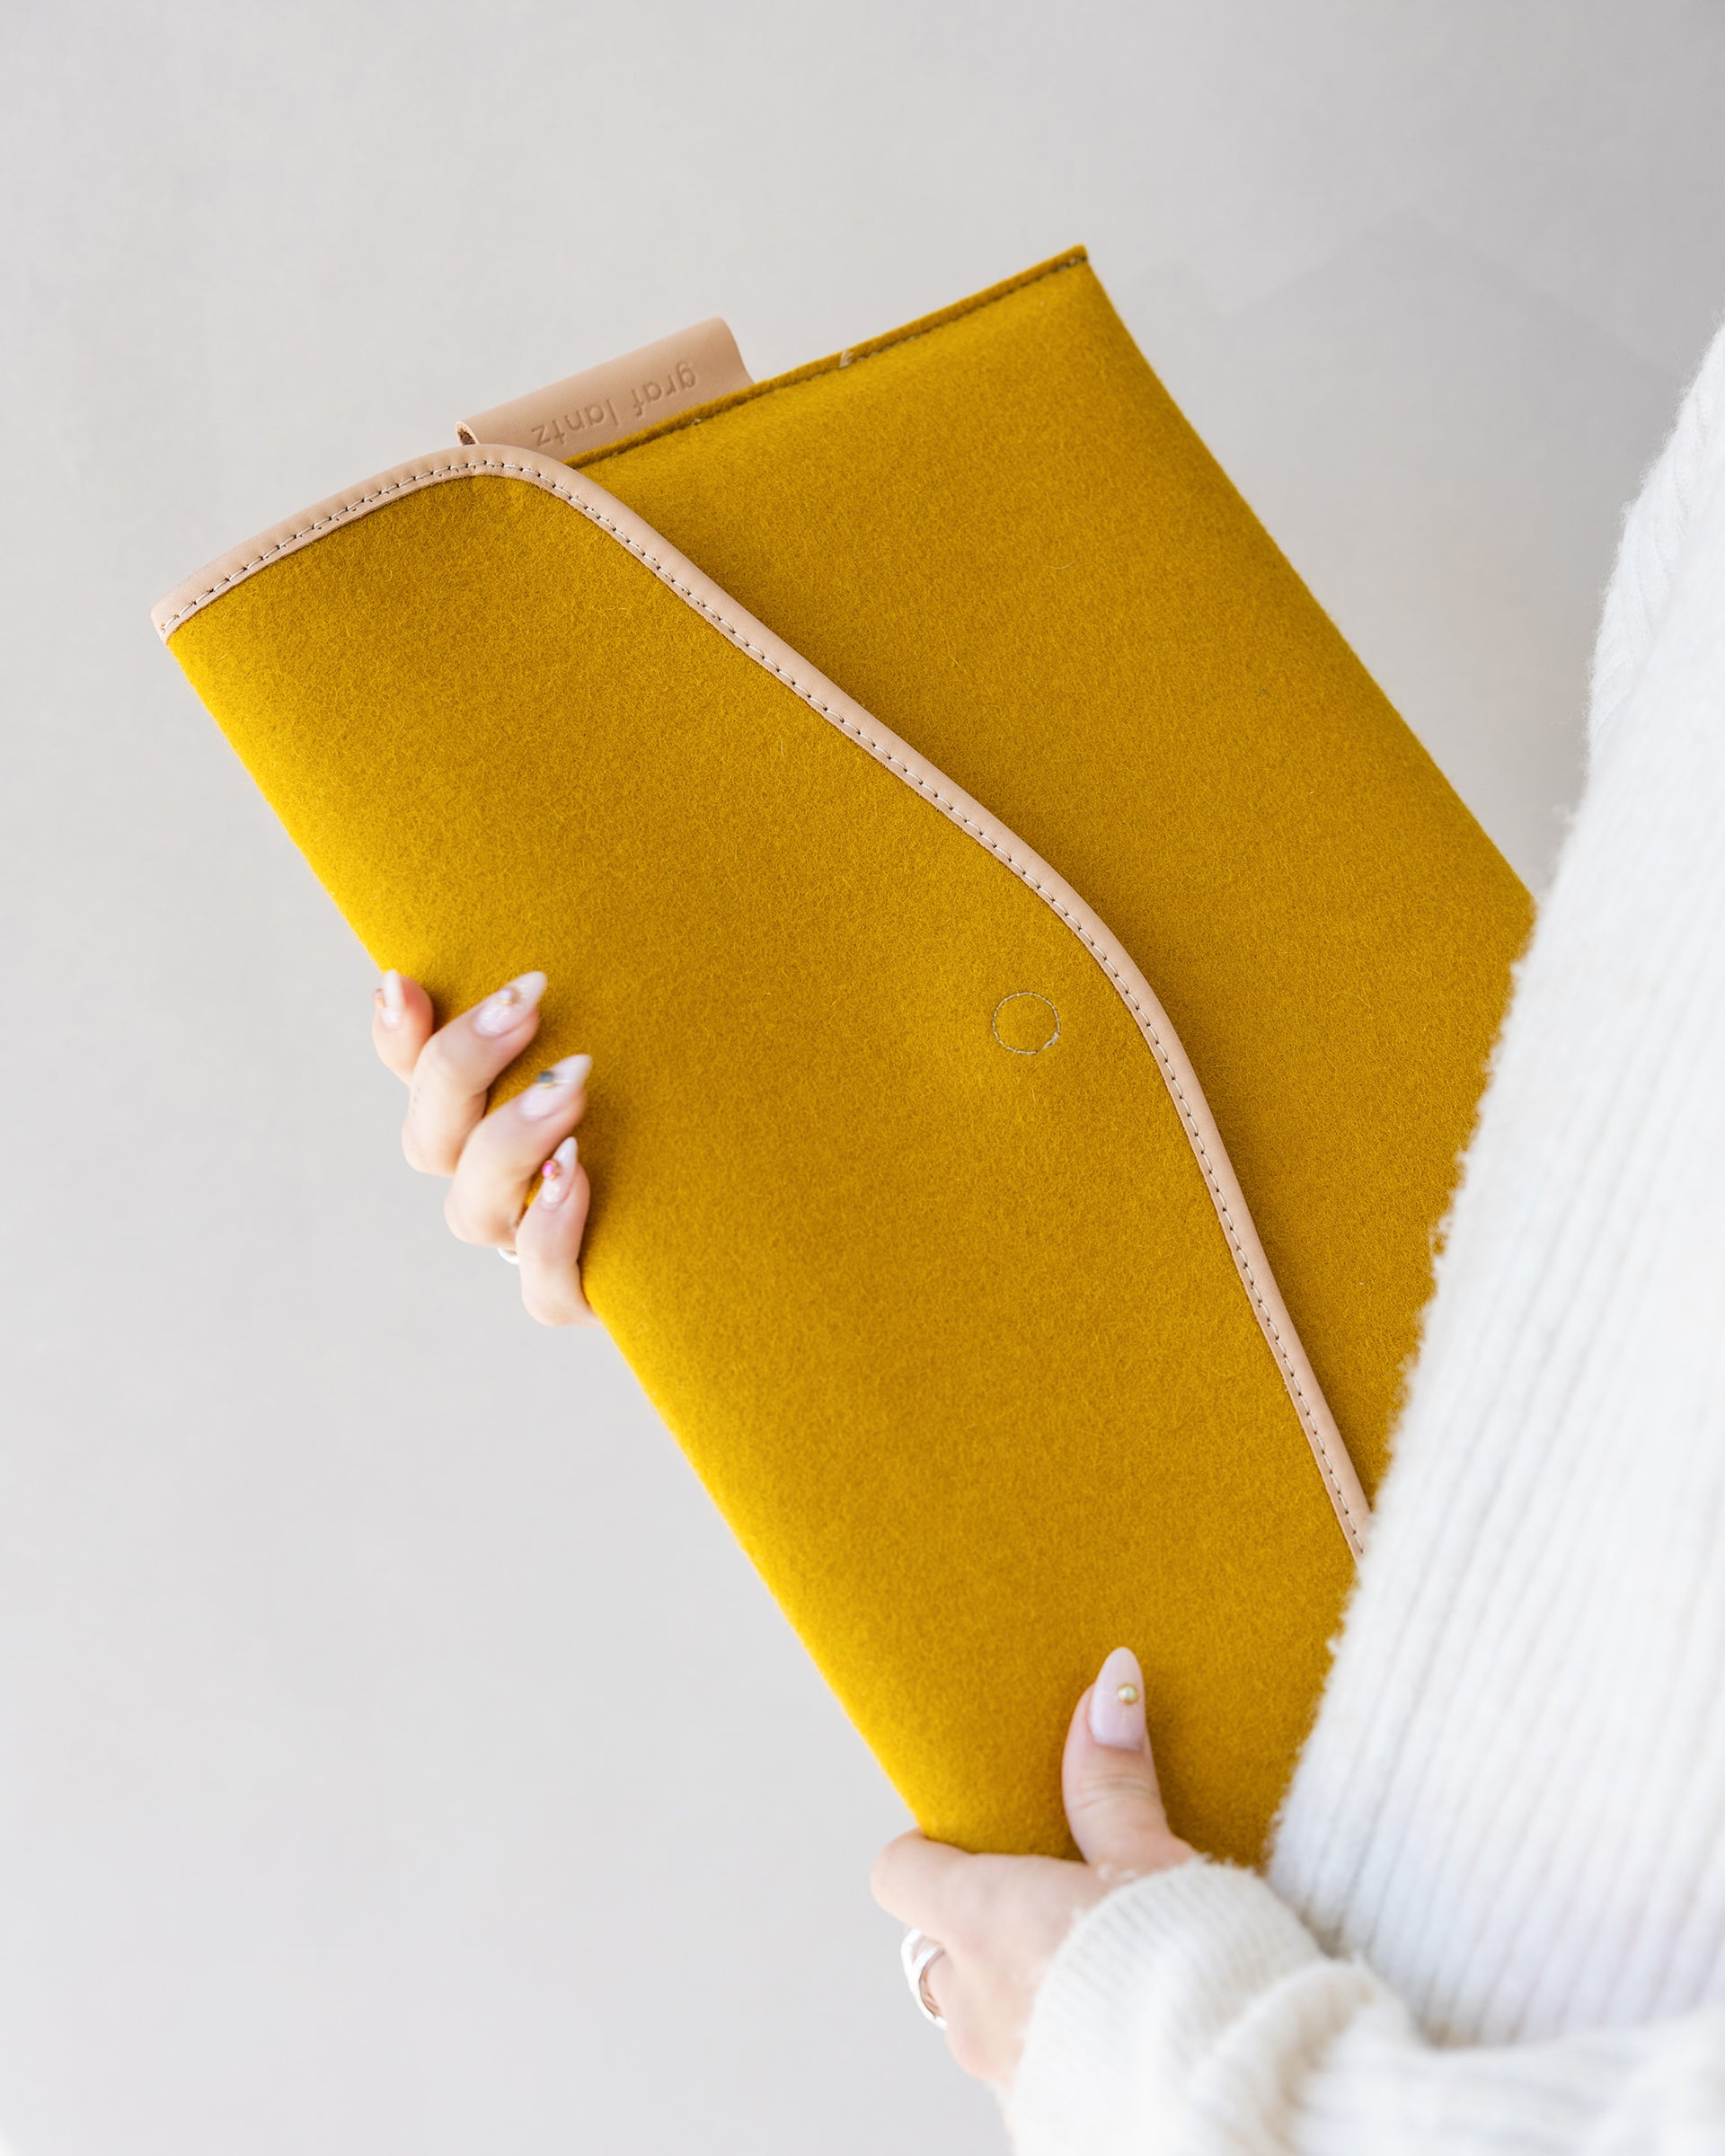 Our 16 inch laptop sleeve. Here in dijon color.